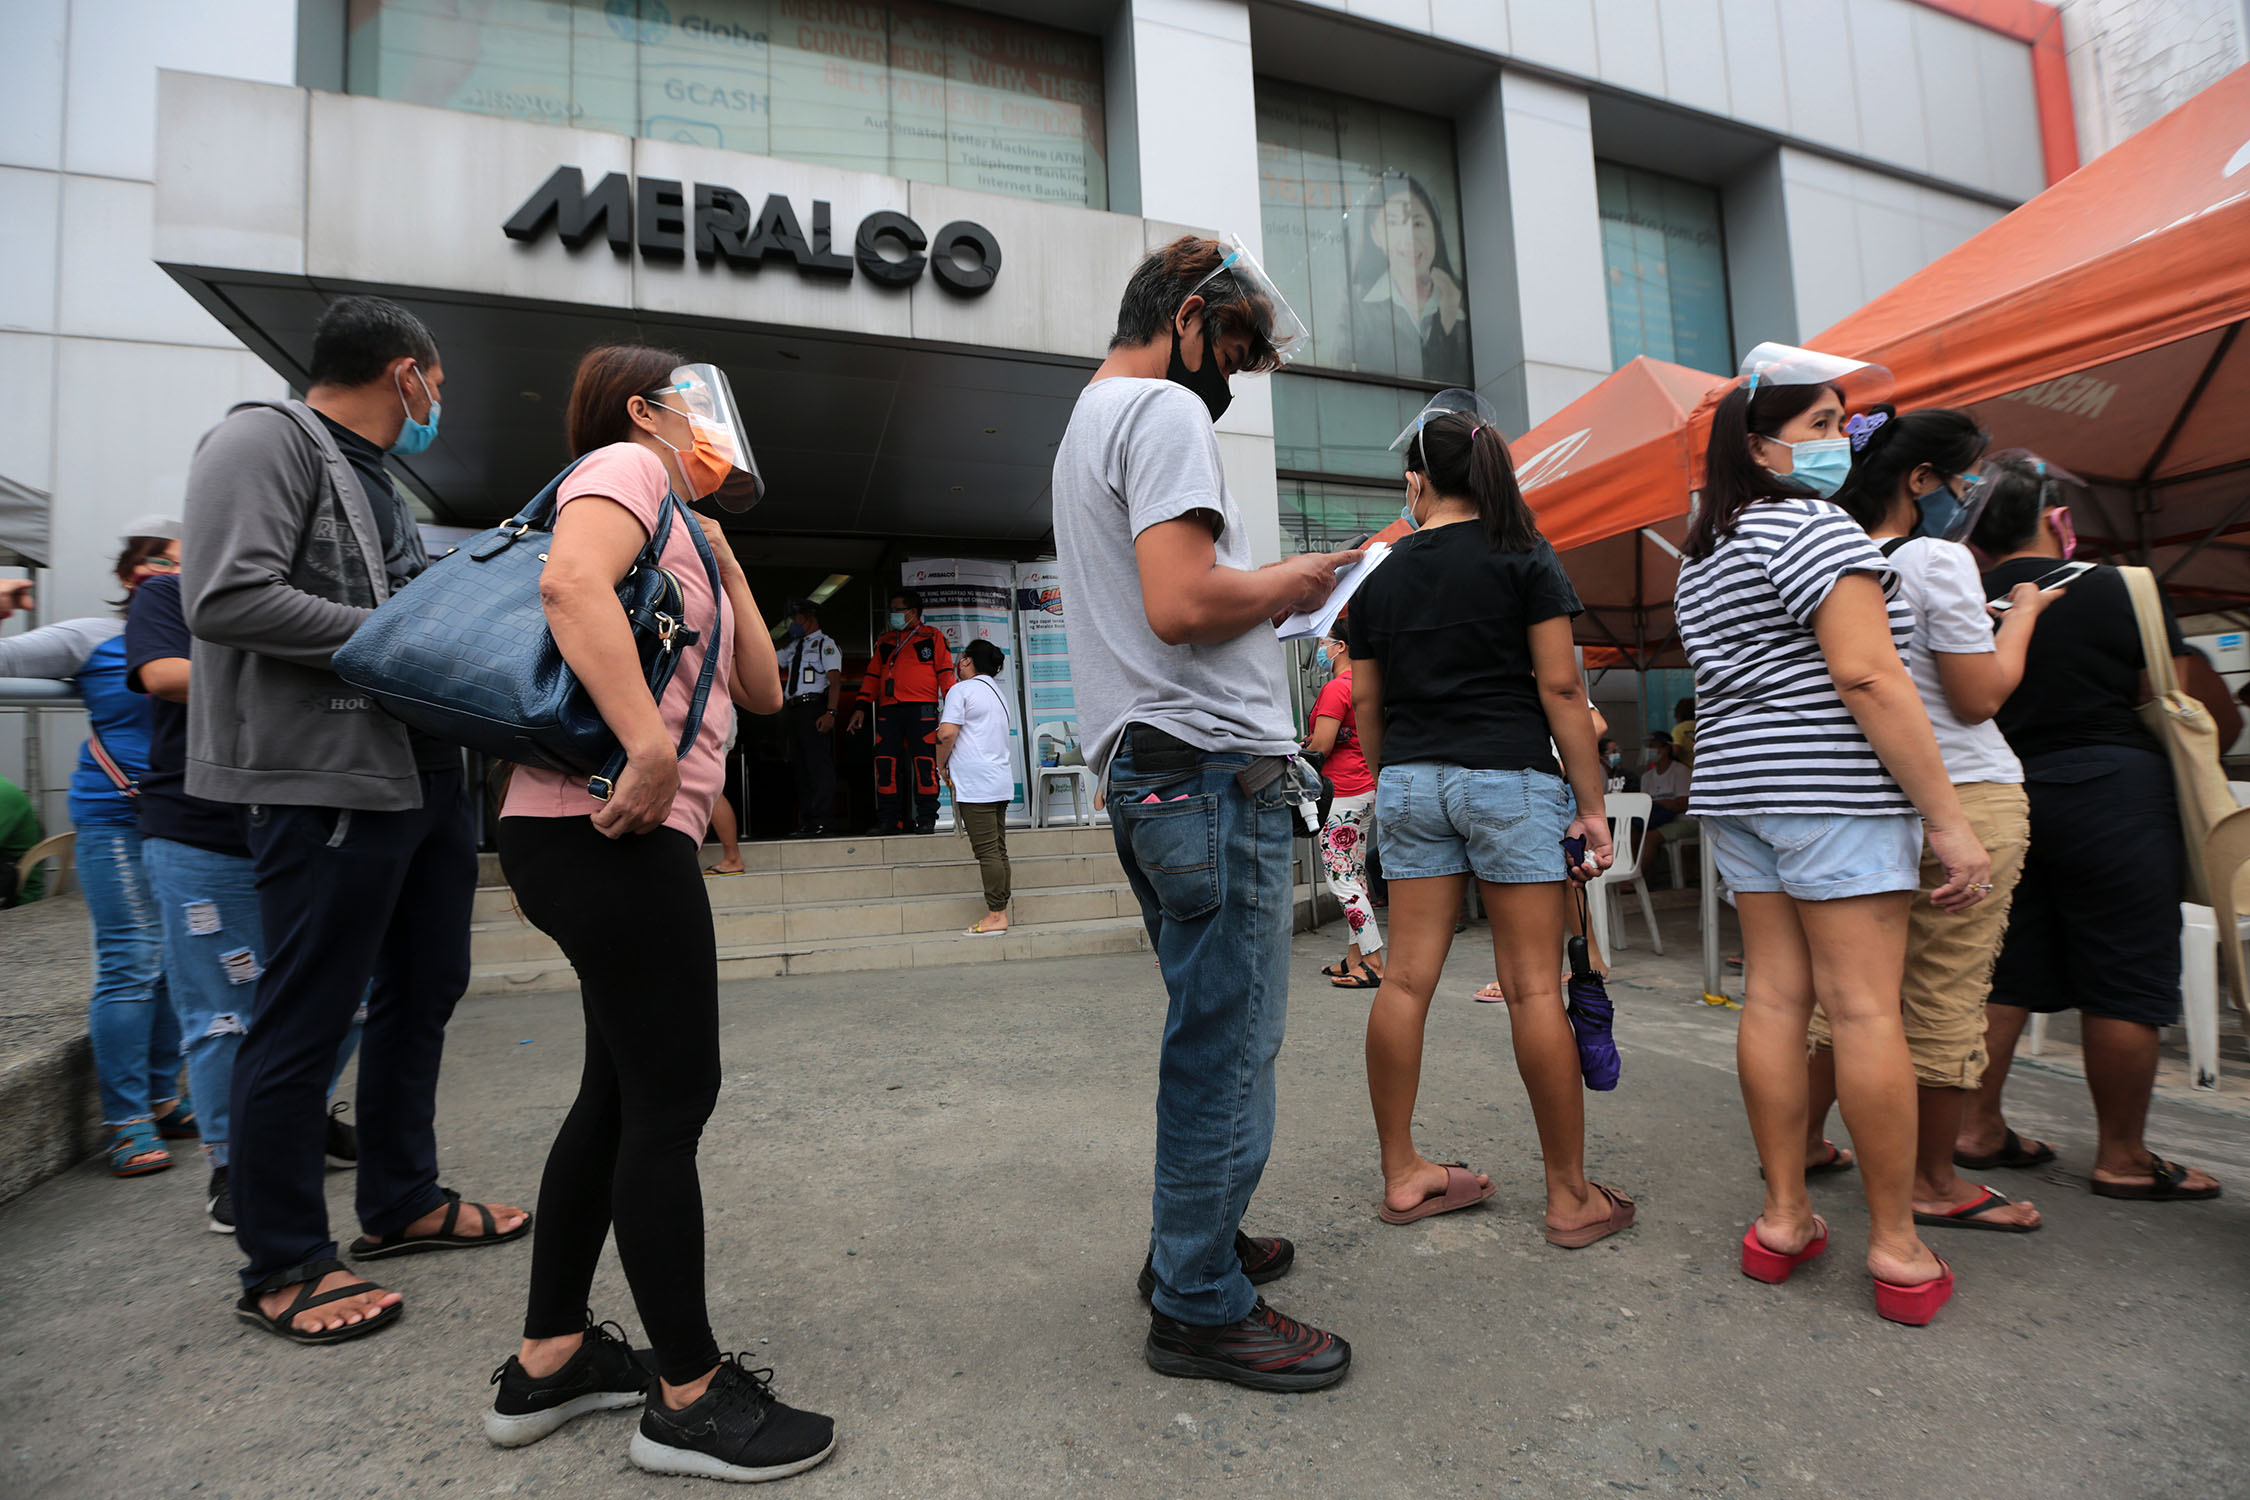 The Manila Electric Co. (Meralco) said the electricity bill of a typical household will go up this month by 39 centavos per kilowatt hour, after a reduction on May.